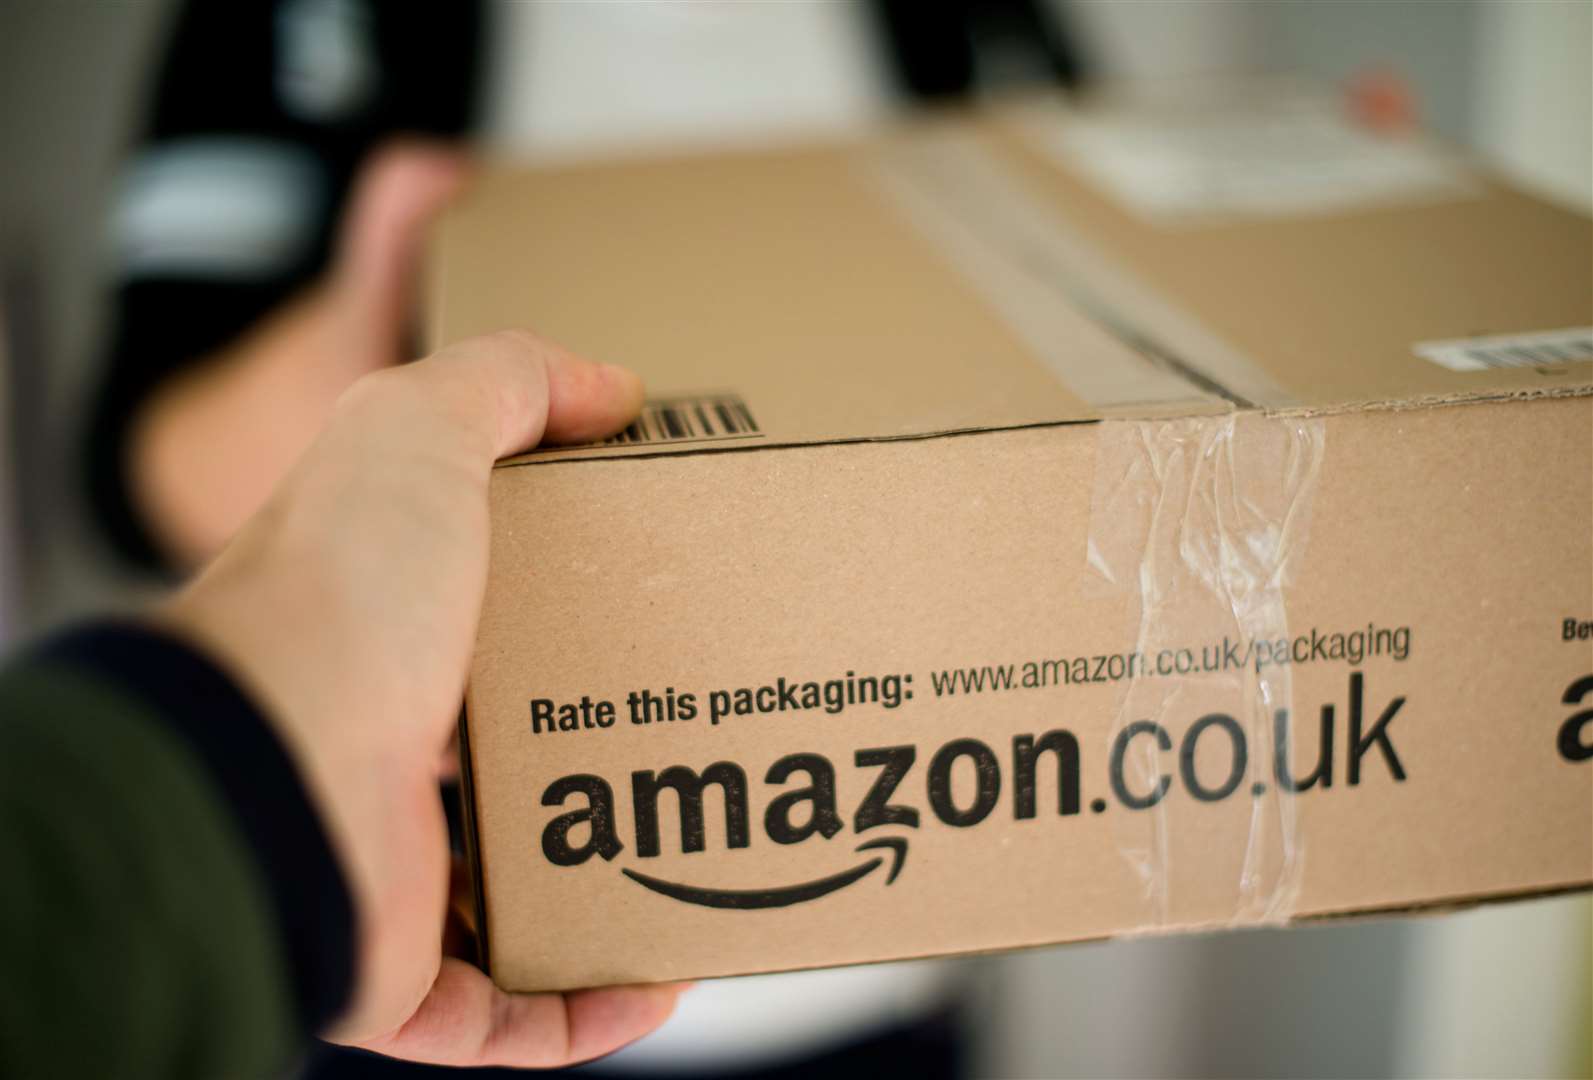 Vasea Monanu was a Amazon delivery driver, but now he’s been banned from driving, he will lose his job. Image: iStock